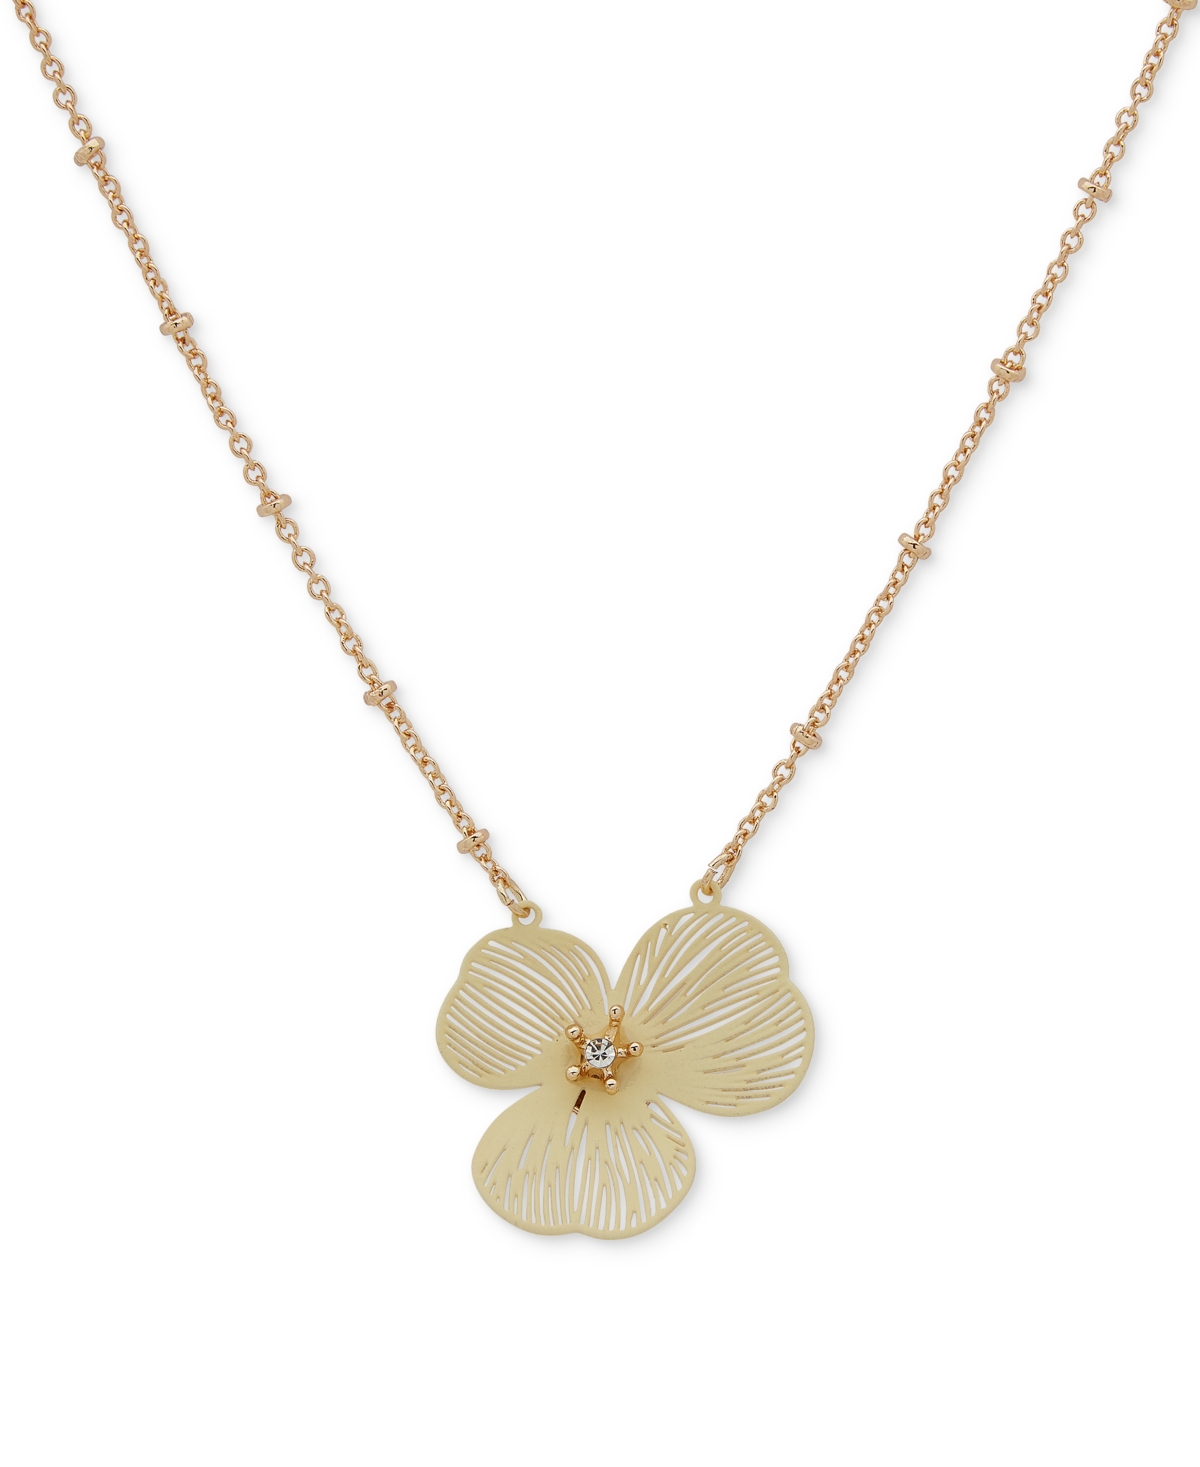 Lonna & Lilly Gold-tone Openwork Flower Pendant Necklace, 16" + 3" Extender In Yellow